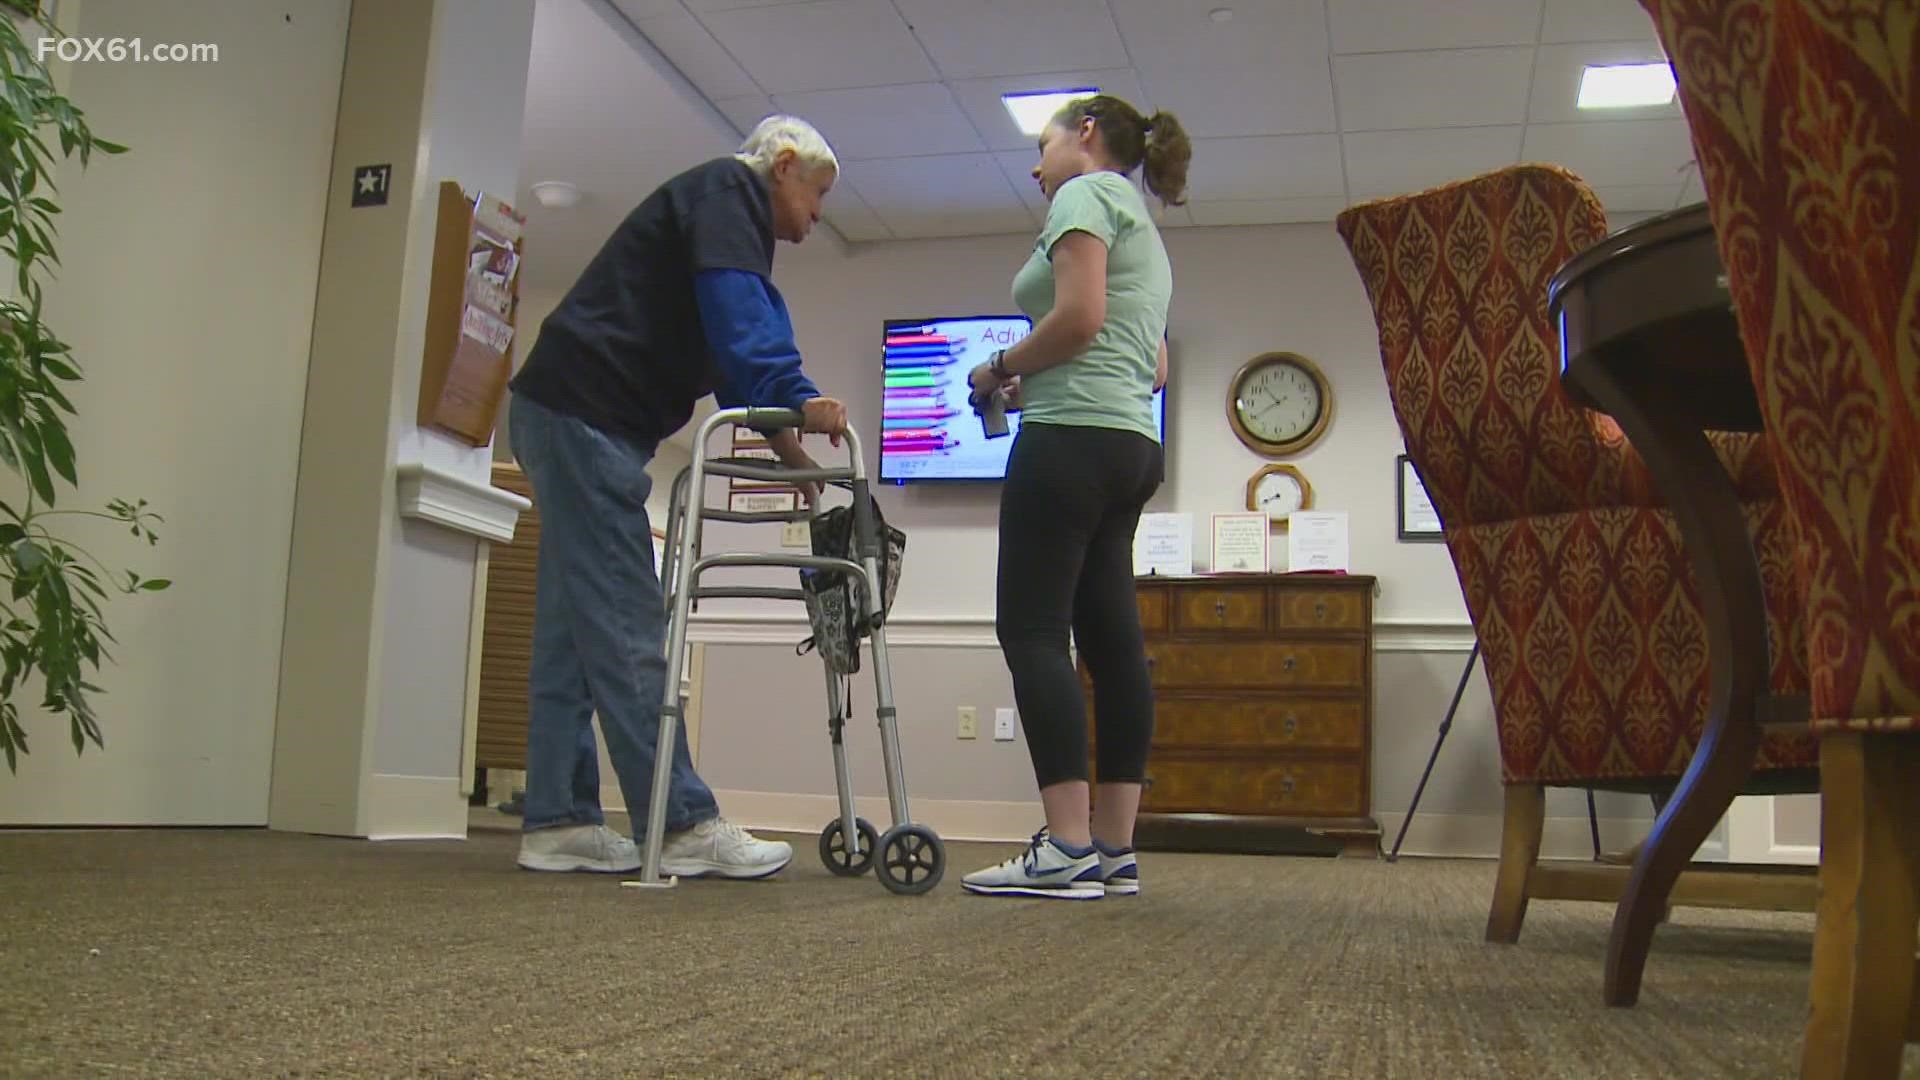 For the first time since the executive order was signed, FOX61 is hearing reactions from residents who have loved ones in long-term care facilities.